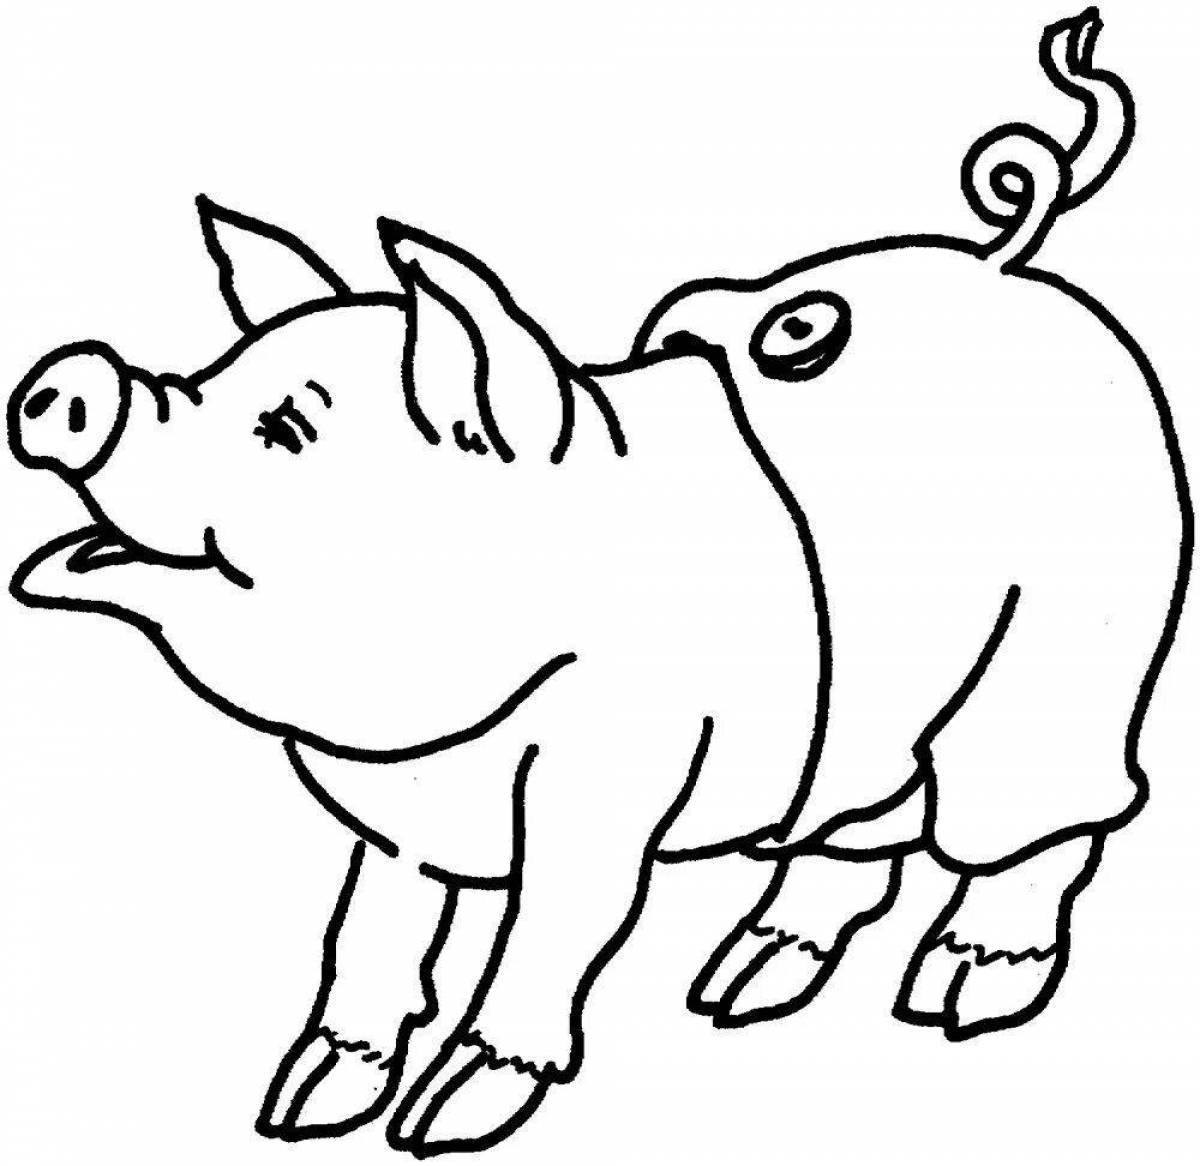 Snuggly mini pig coloring page